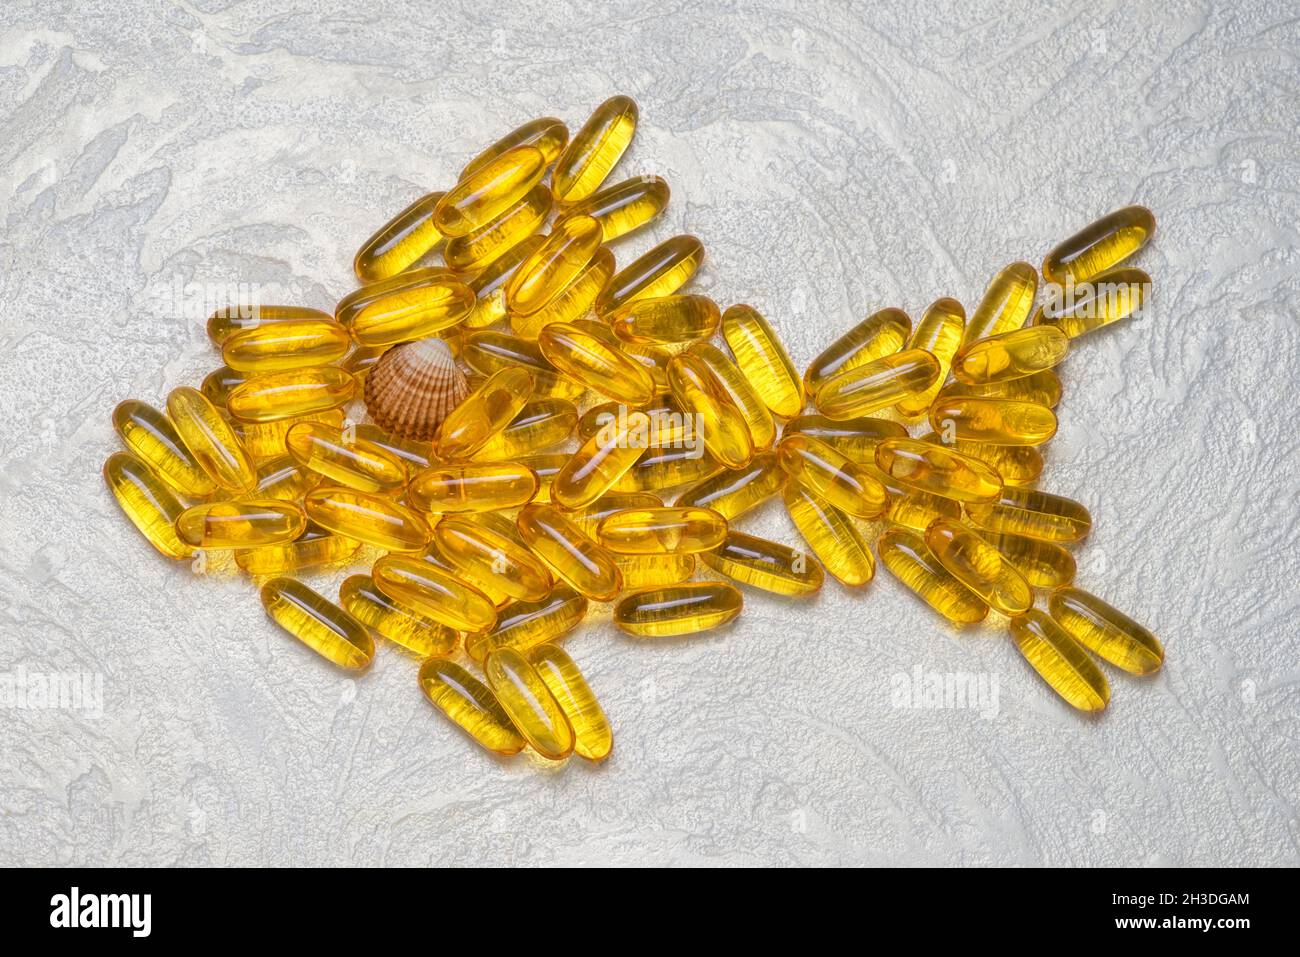 Omega3 capsules in fish shape. EPA and DHA are essential fatty substances that our bodies need on a daily basis. Stock Photo